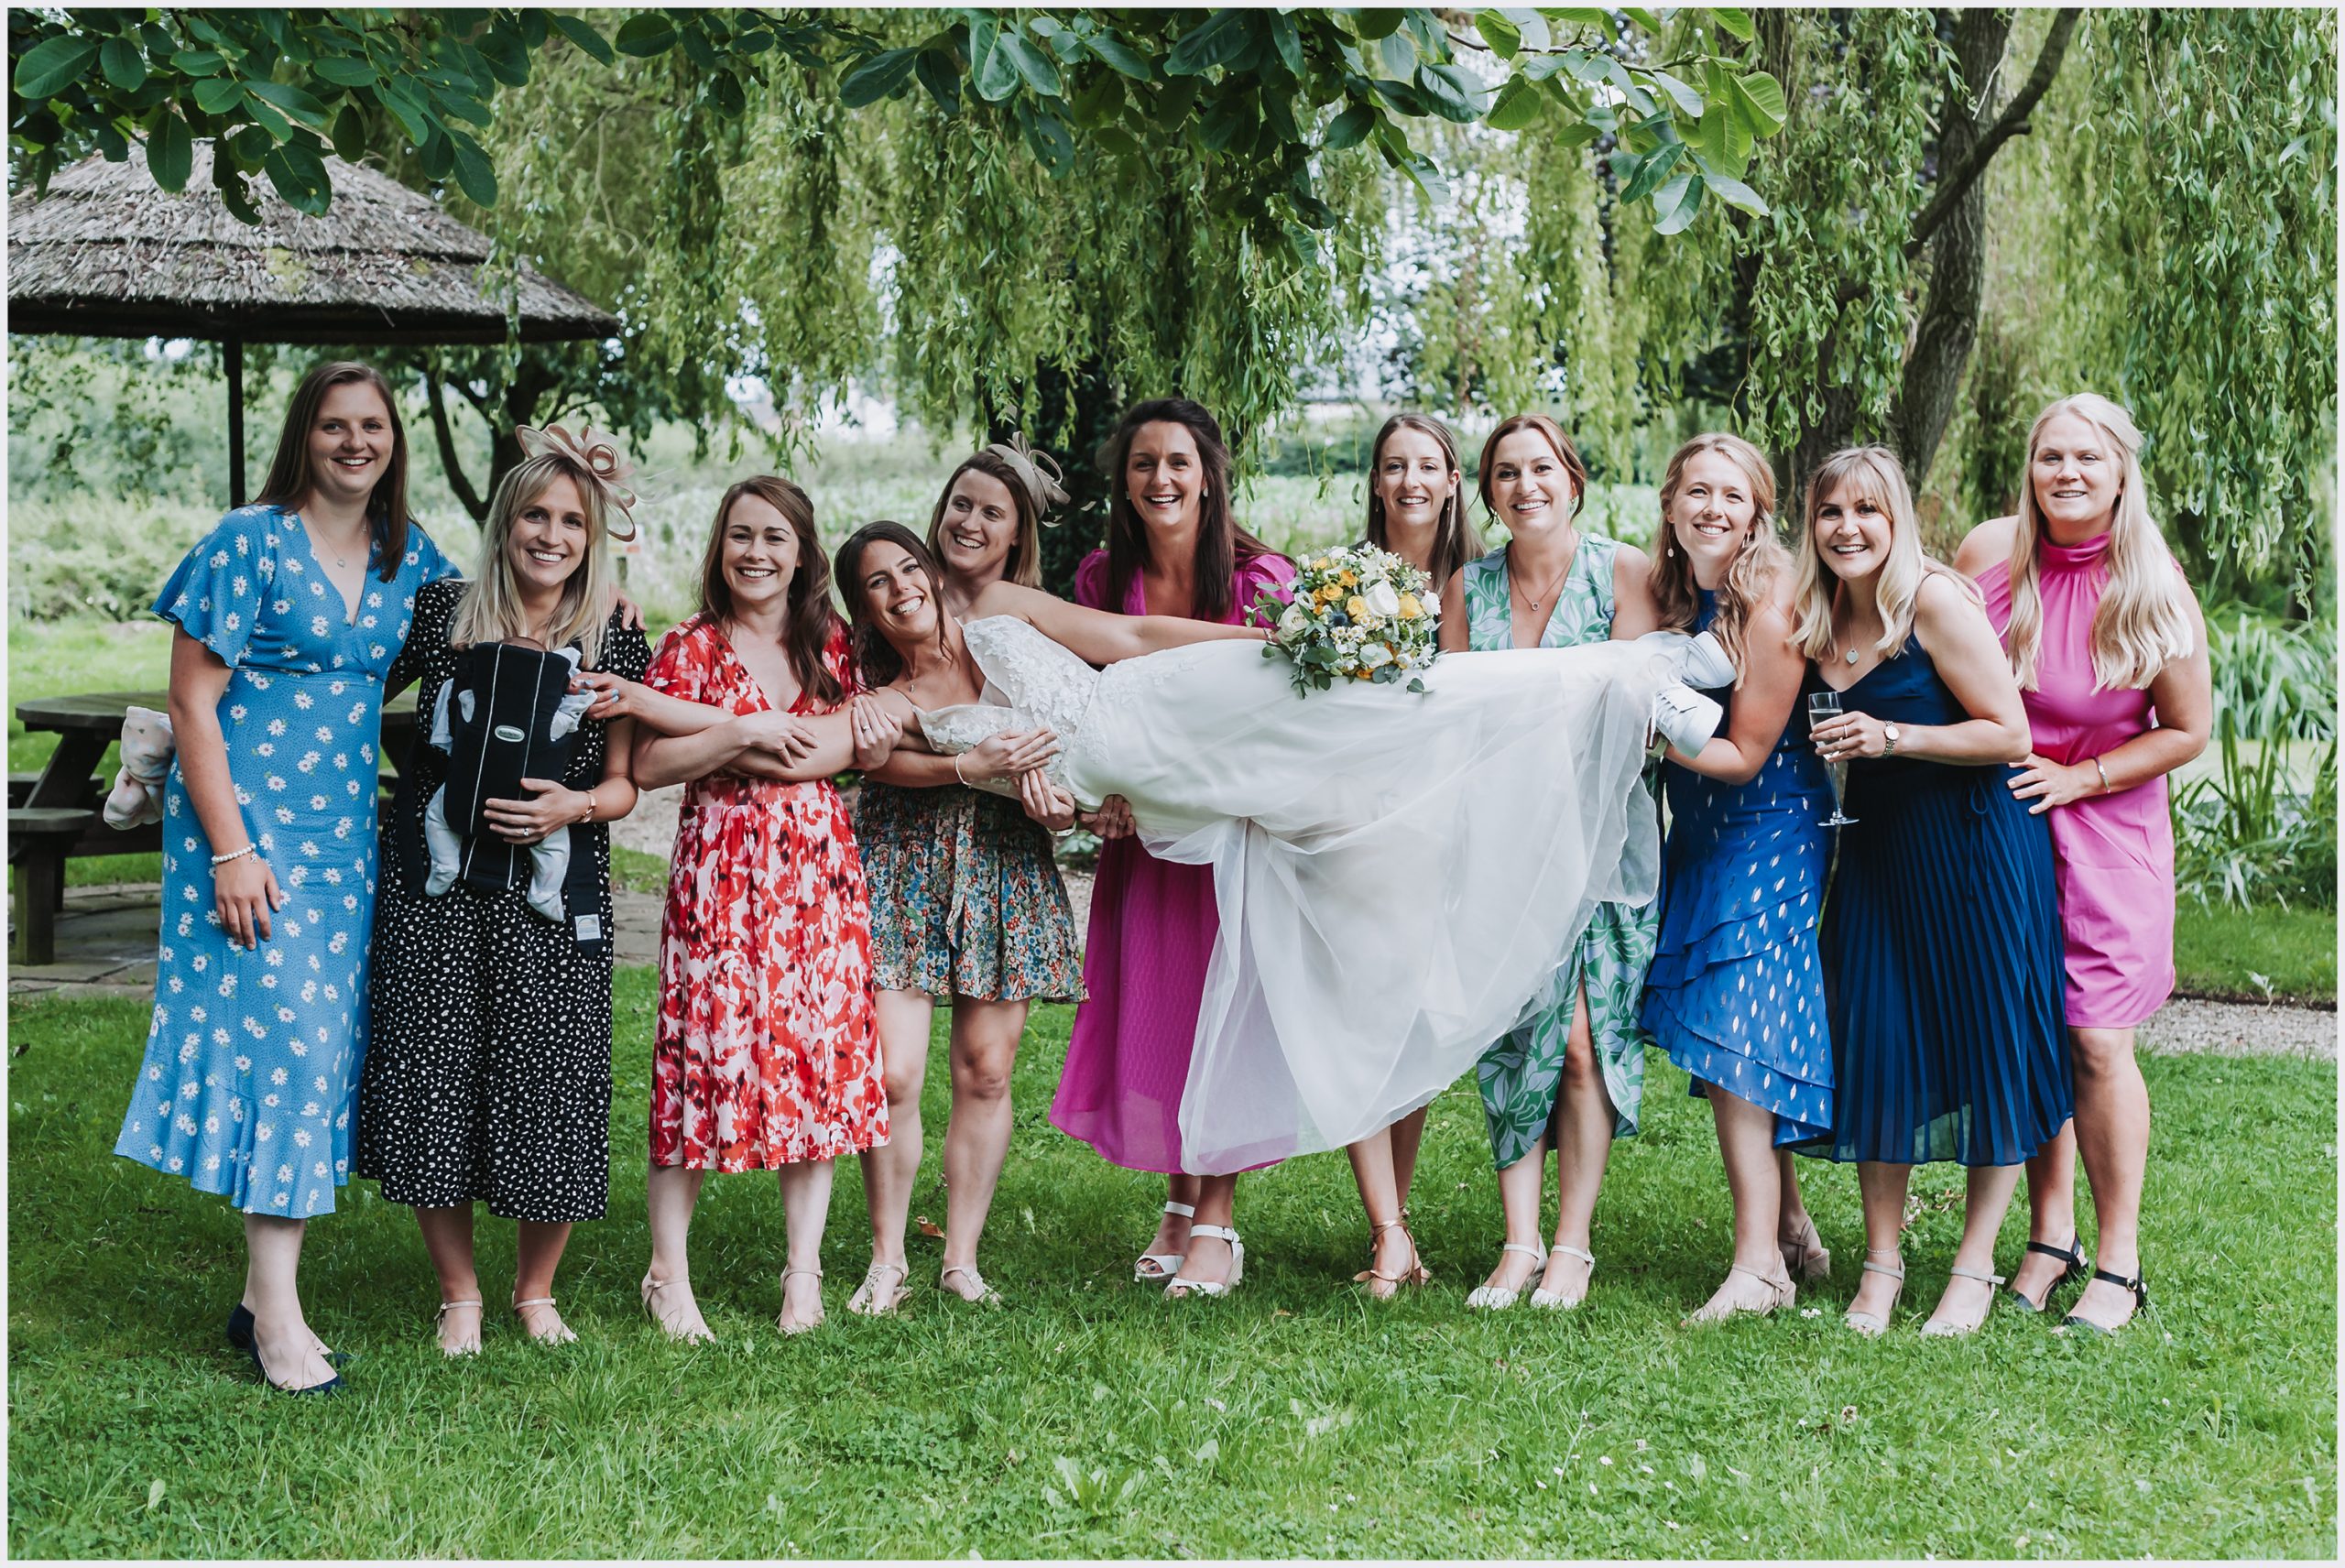 A bride is carried by all of her best friends wearing colourful beautiful dresses in the gorgeous gardens at The Grosvenor Pulford Hotel and Spa.  Image captured by Helena Jayne Photography